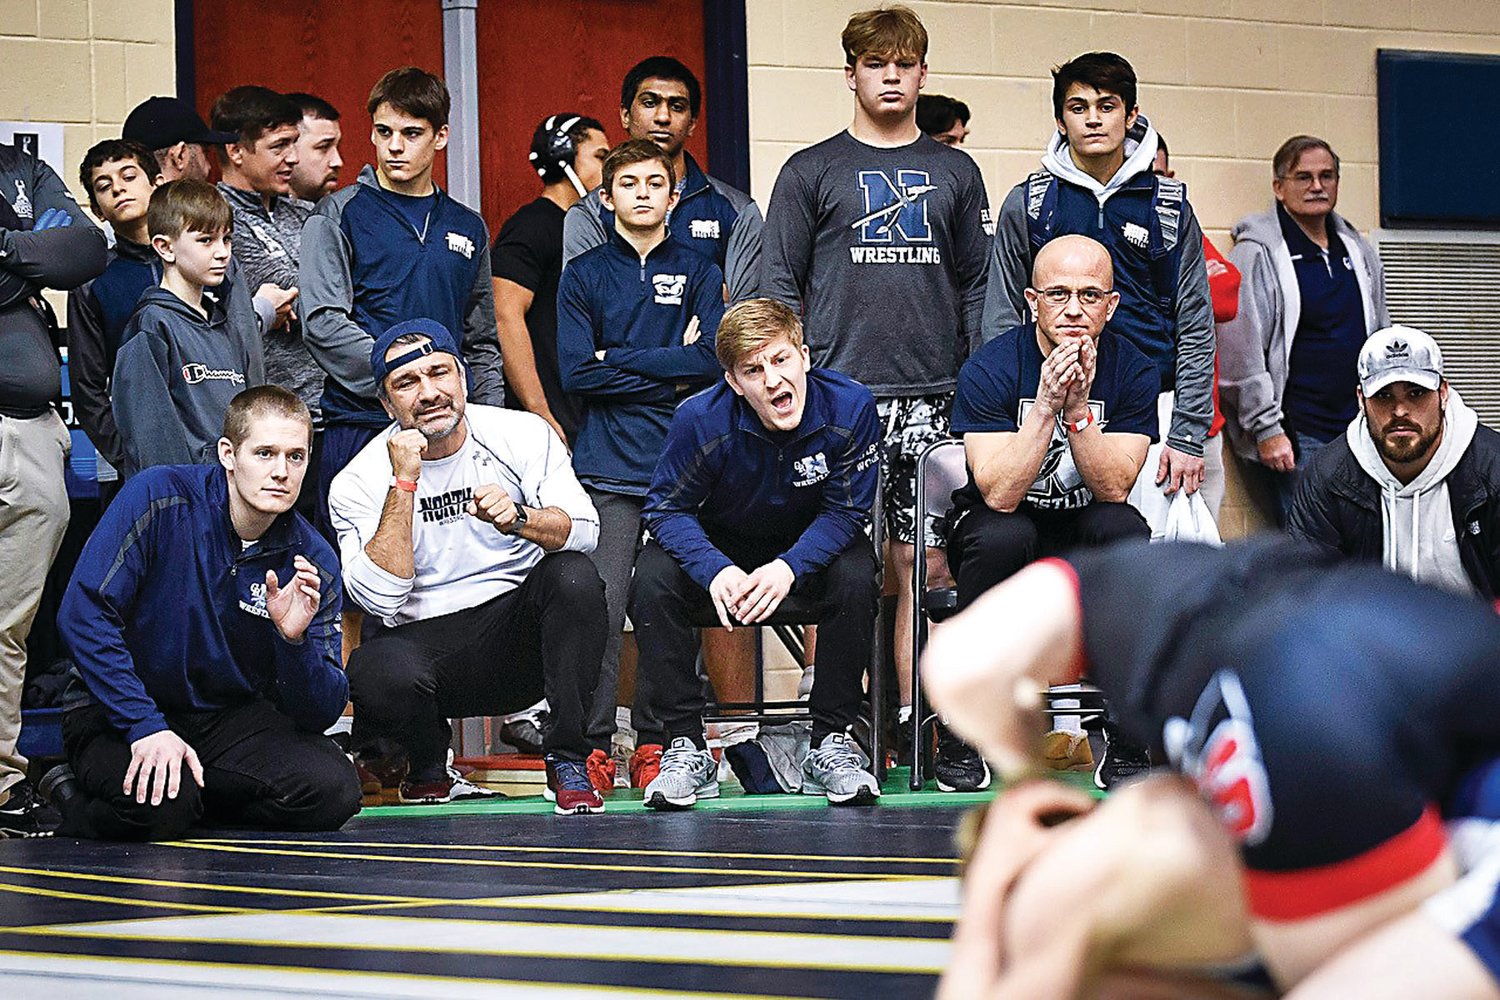 Coaches from the Council Rock North wrestling team shout instructions during Tony Burke’s 113-pound triple overtime 5-3 loss to Holden Huhn of La Salle (Cincinnati).